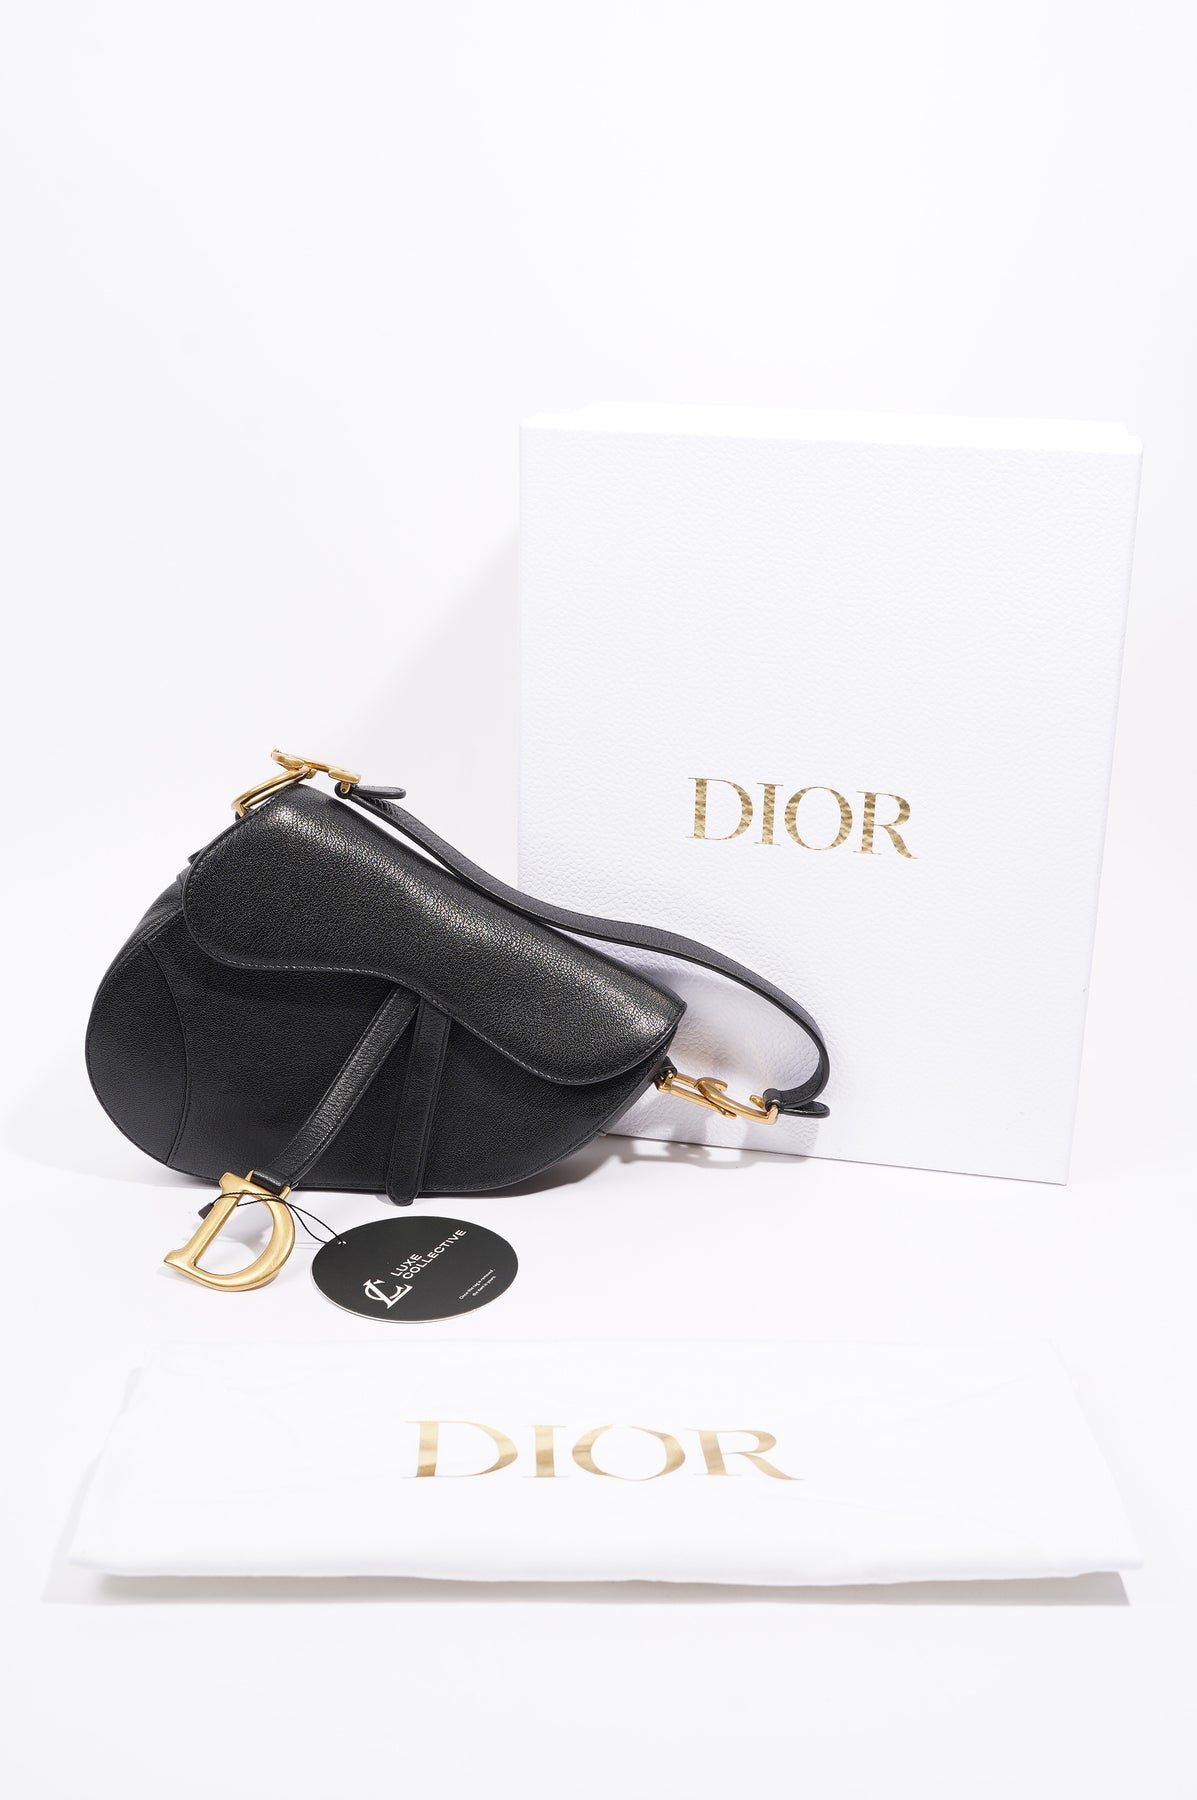 Christian Dior Womens Saddle Bag Black – Luxe Collective